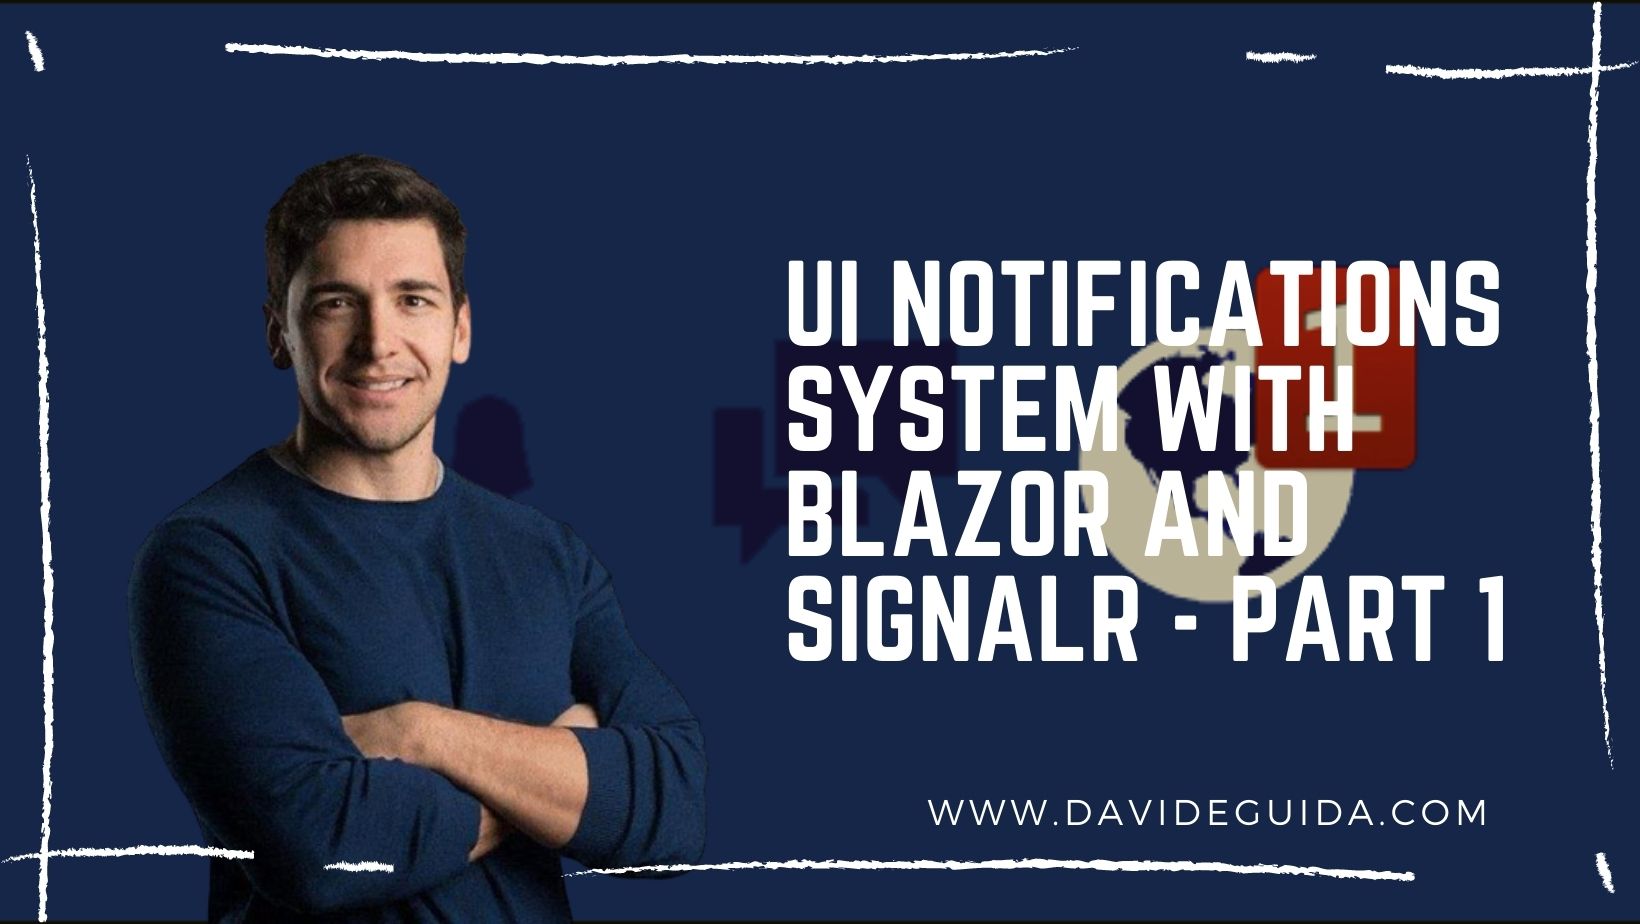 UI notifications system with Blazor and SignalR - part 1